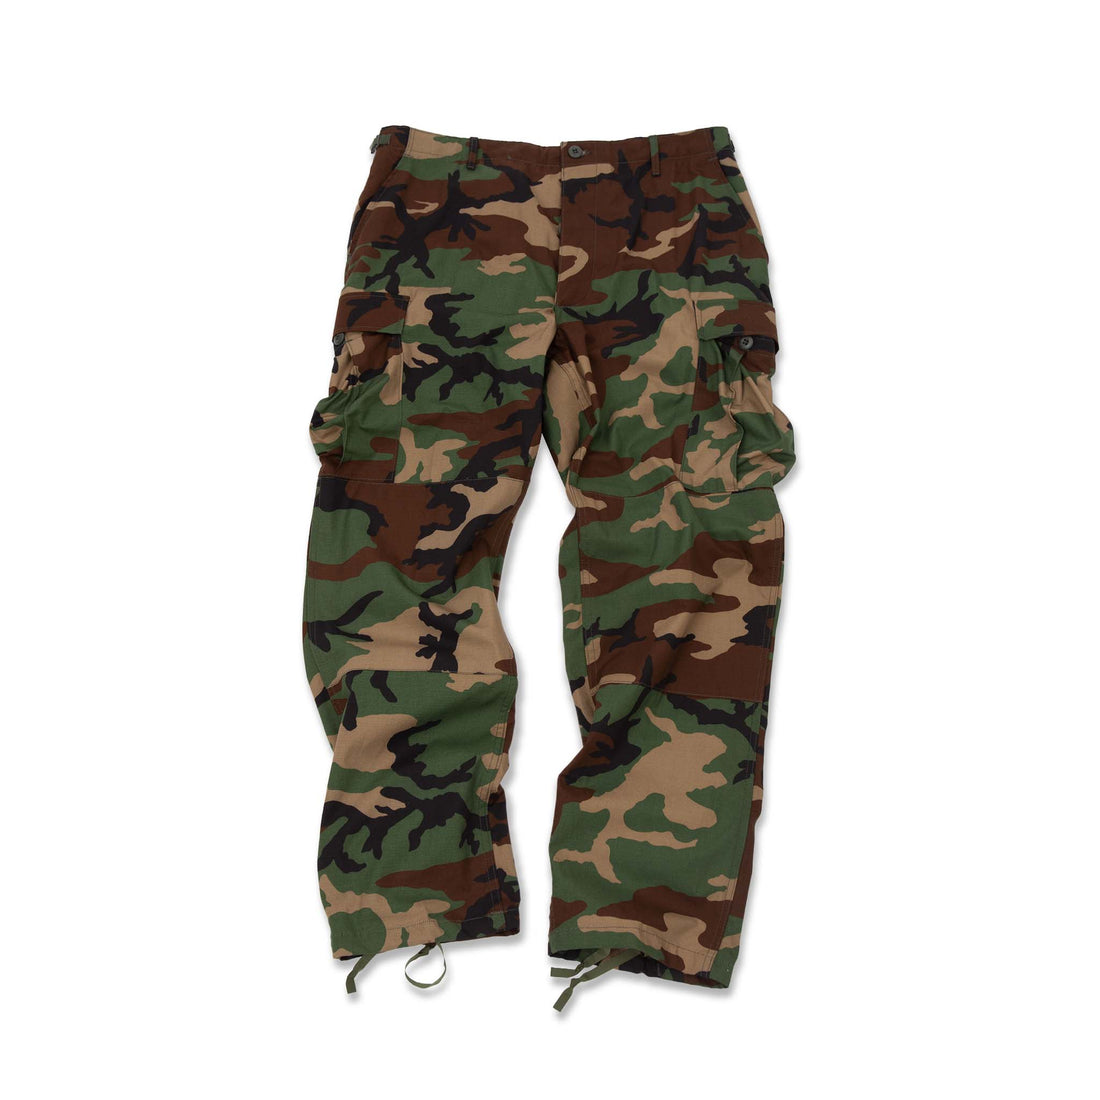 PROPPER Cargo Pants are lightweight and breathable, they provide maximum durability in classic style with all the functional details you need. The perfect Ripstop BDU Trousers for warmer days. Propper is a manufacturer of MIL-SPEC clothing. Since 1967, it has been one of the main uniform suppliers to the United States military. ROSYTH TERRACE Authorized Distributor of PROPPER Singapore.